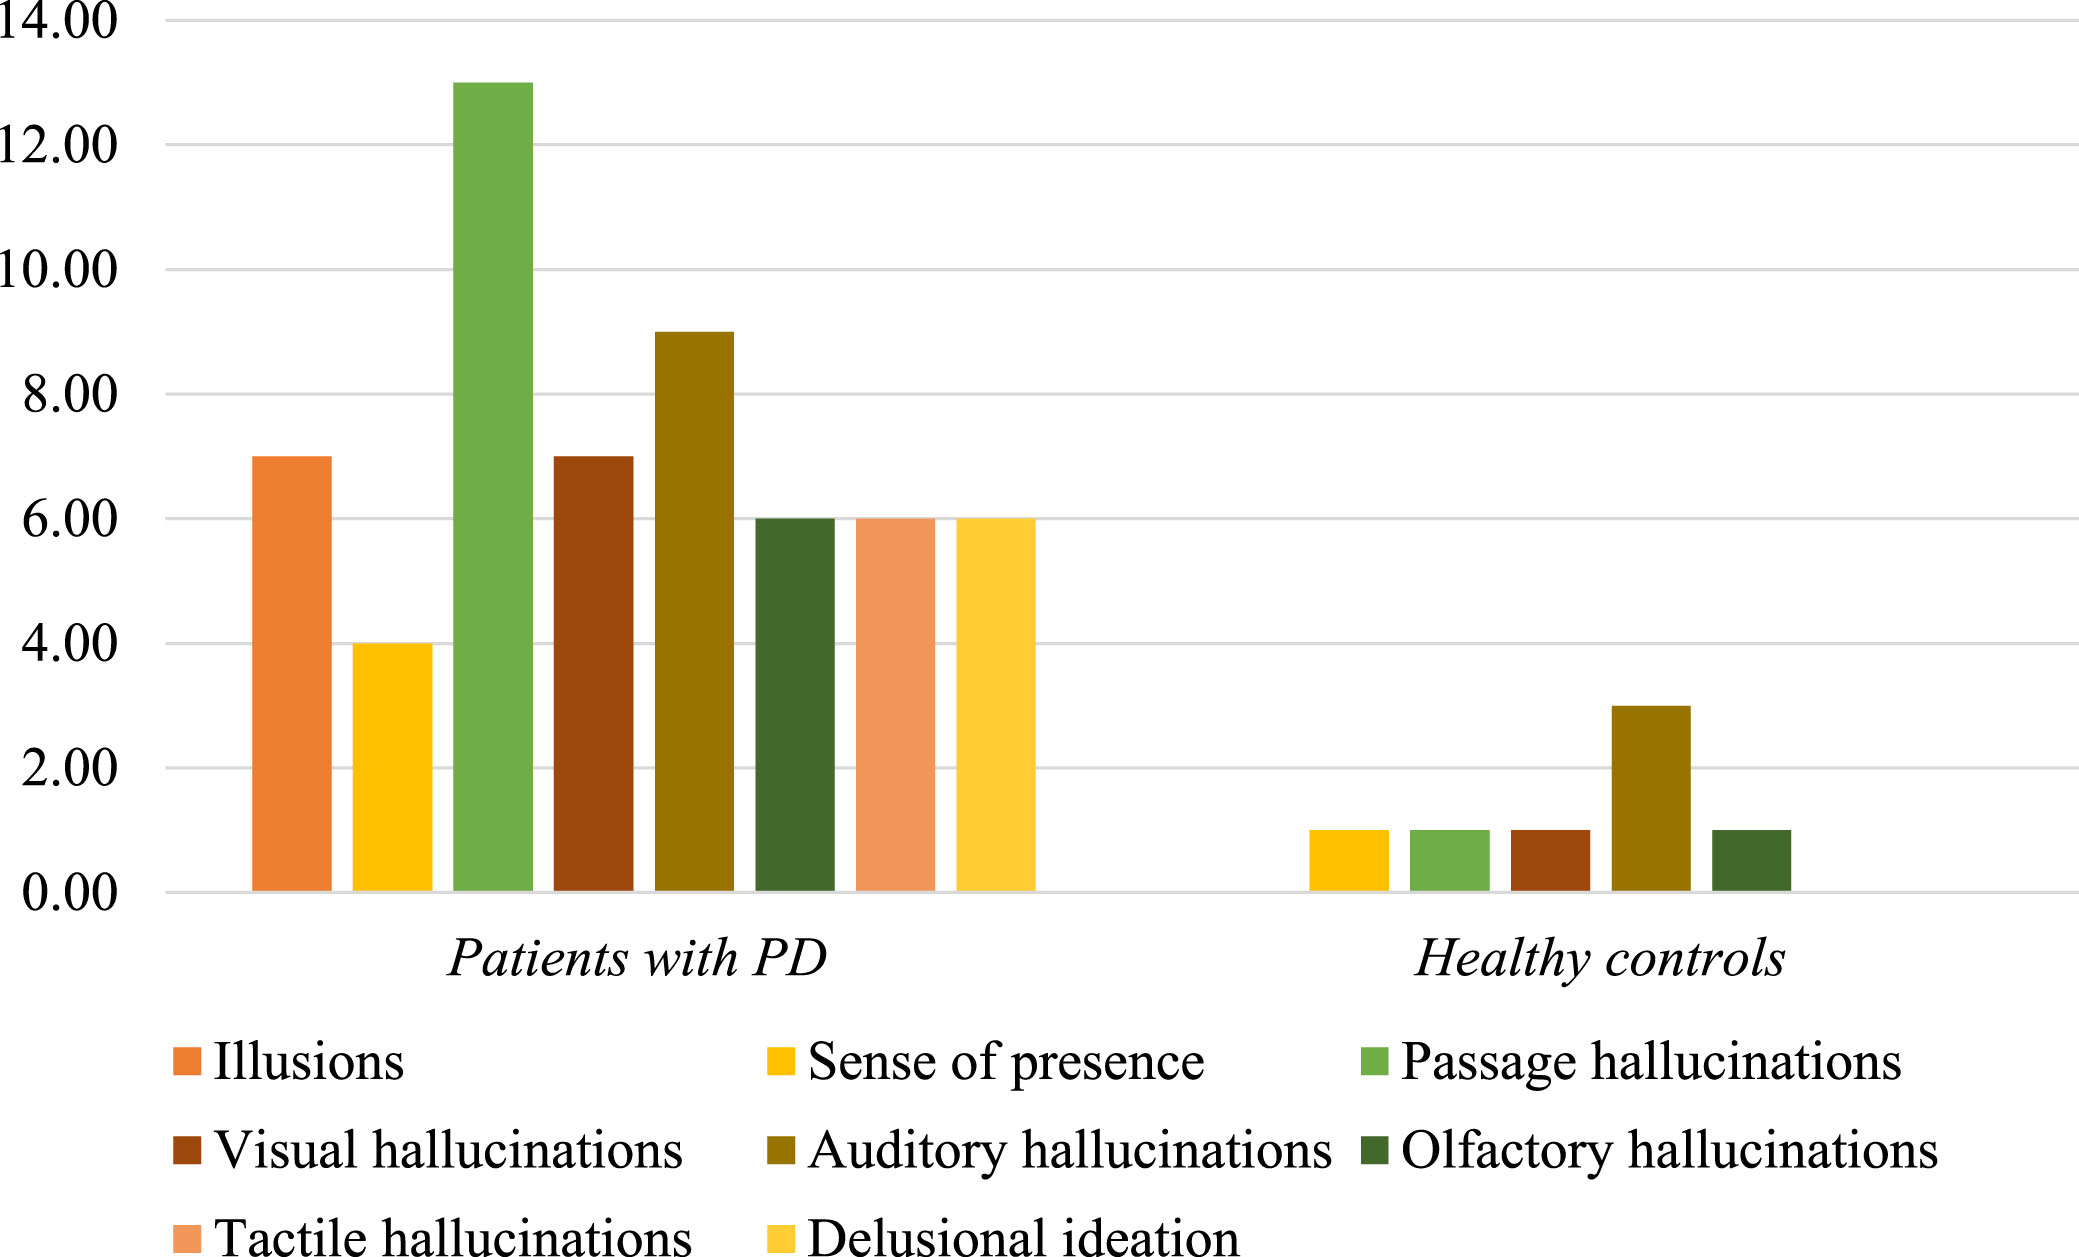 Psychotic features in patients with PD and healthy controls. The bar chart illustrates the distribution of several modalities of psychotic manifestations in healthy controls and patients with PD. In healthy subjects, auditory disturbances were more frequent followed by minor psychotic phenomena, visual and olfactory hallucinations. In the PD group, there was a predominance of passage hallucinations followed by auditory phenomena, illusions and formed visual hallucinations, olfactory and tactile abnormalities, delusional ideation and, finally, sense of presence. The presence of passage hallucinations and illusions was significantly higher in patients with PD, compared to healthy individuals.